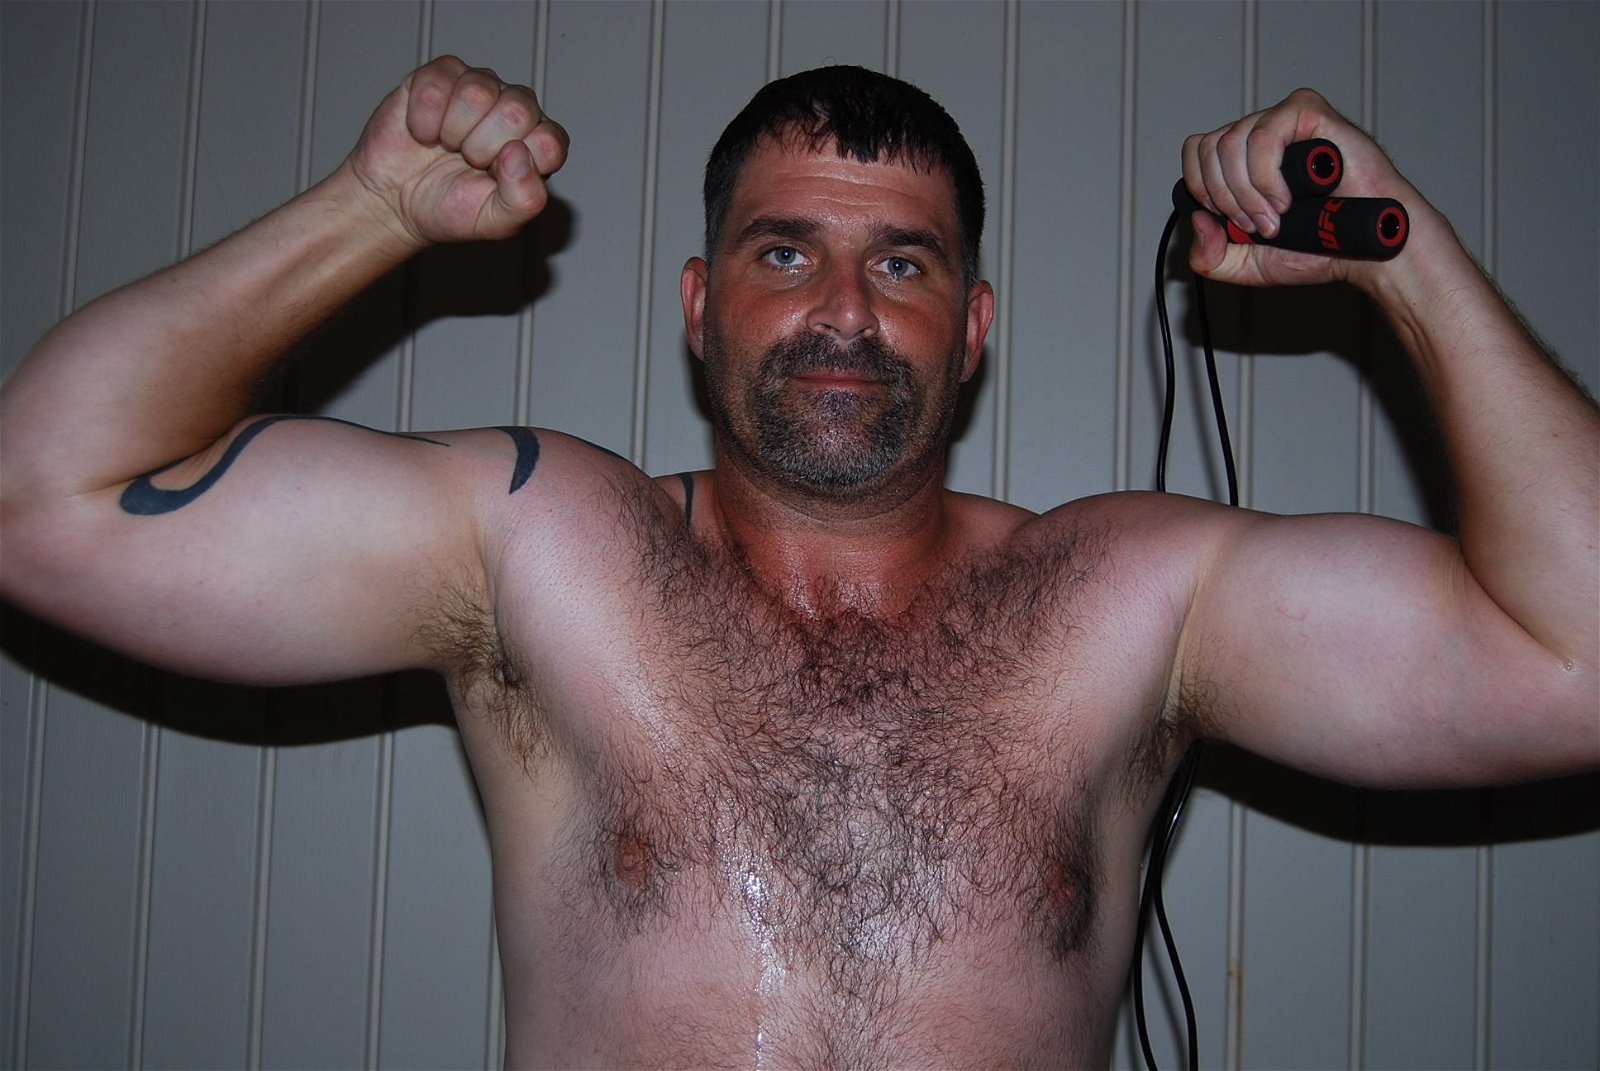 Watch the Photo by Hairy Musclebears with the username @hairymusclebears, posted on September 24, 2019. The post is about the topic GayTumblr. and the text says 'hairychest Manly Macho Man from USAFUR.com galleries  #gaybody #gaygames #gayguys #gaymale #gayhunk #hairybelly #BearPhotoADay #gaychubby #gay #bearweek365  #pop #papi #grandpa #grandfather #silverdaddy #silverfox #hairybelly #chub #chubby #husband..'